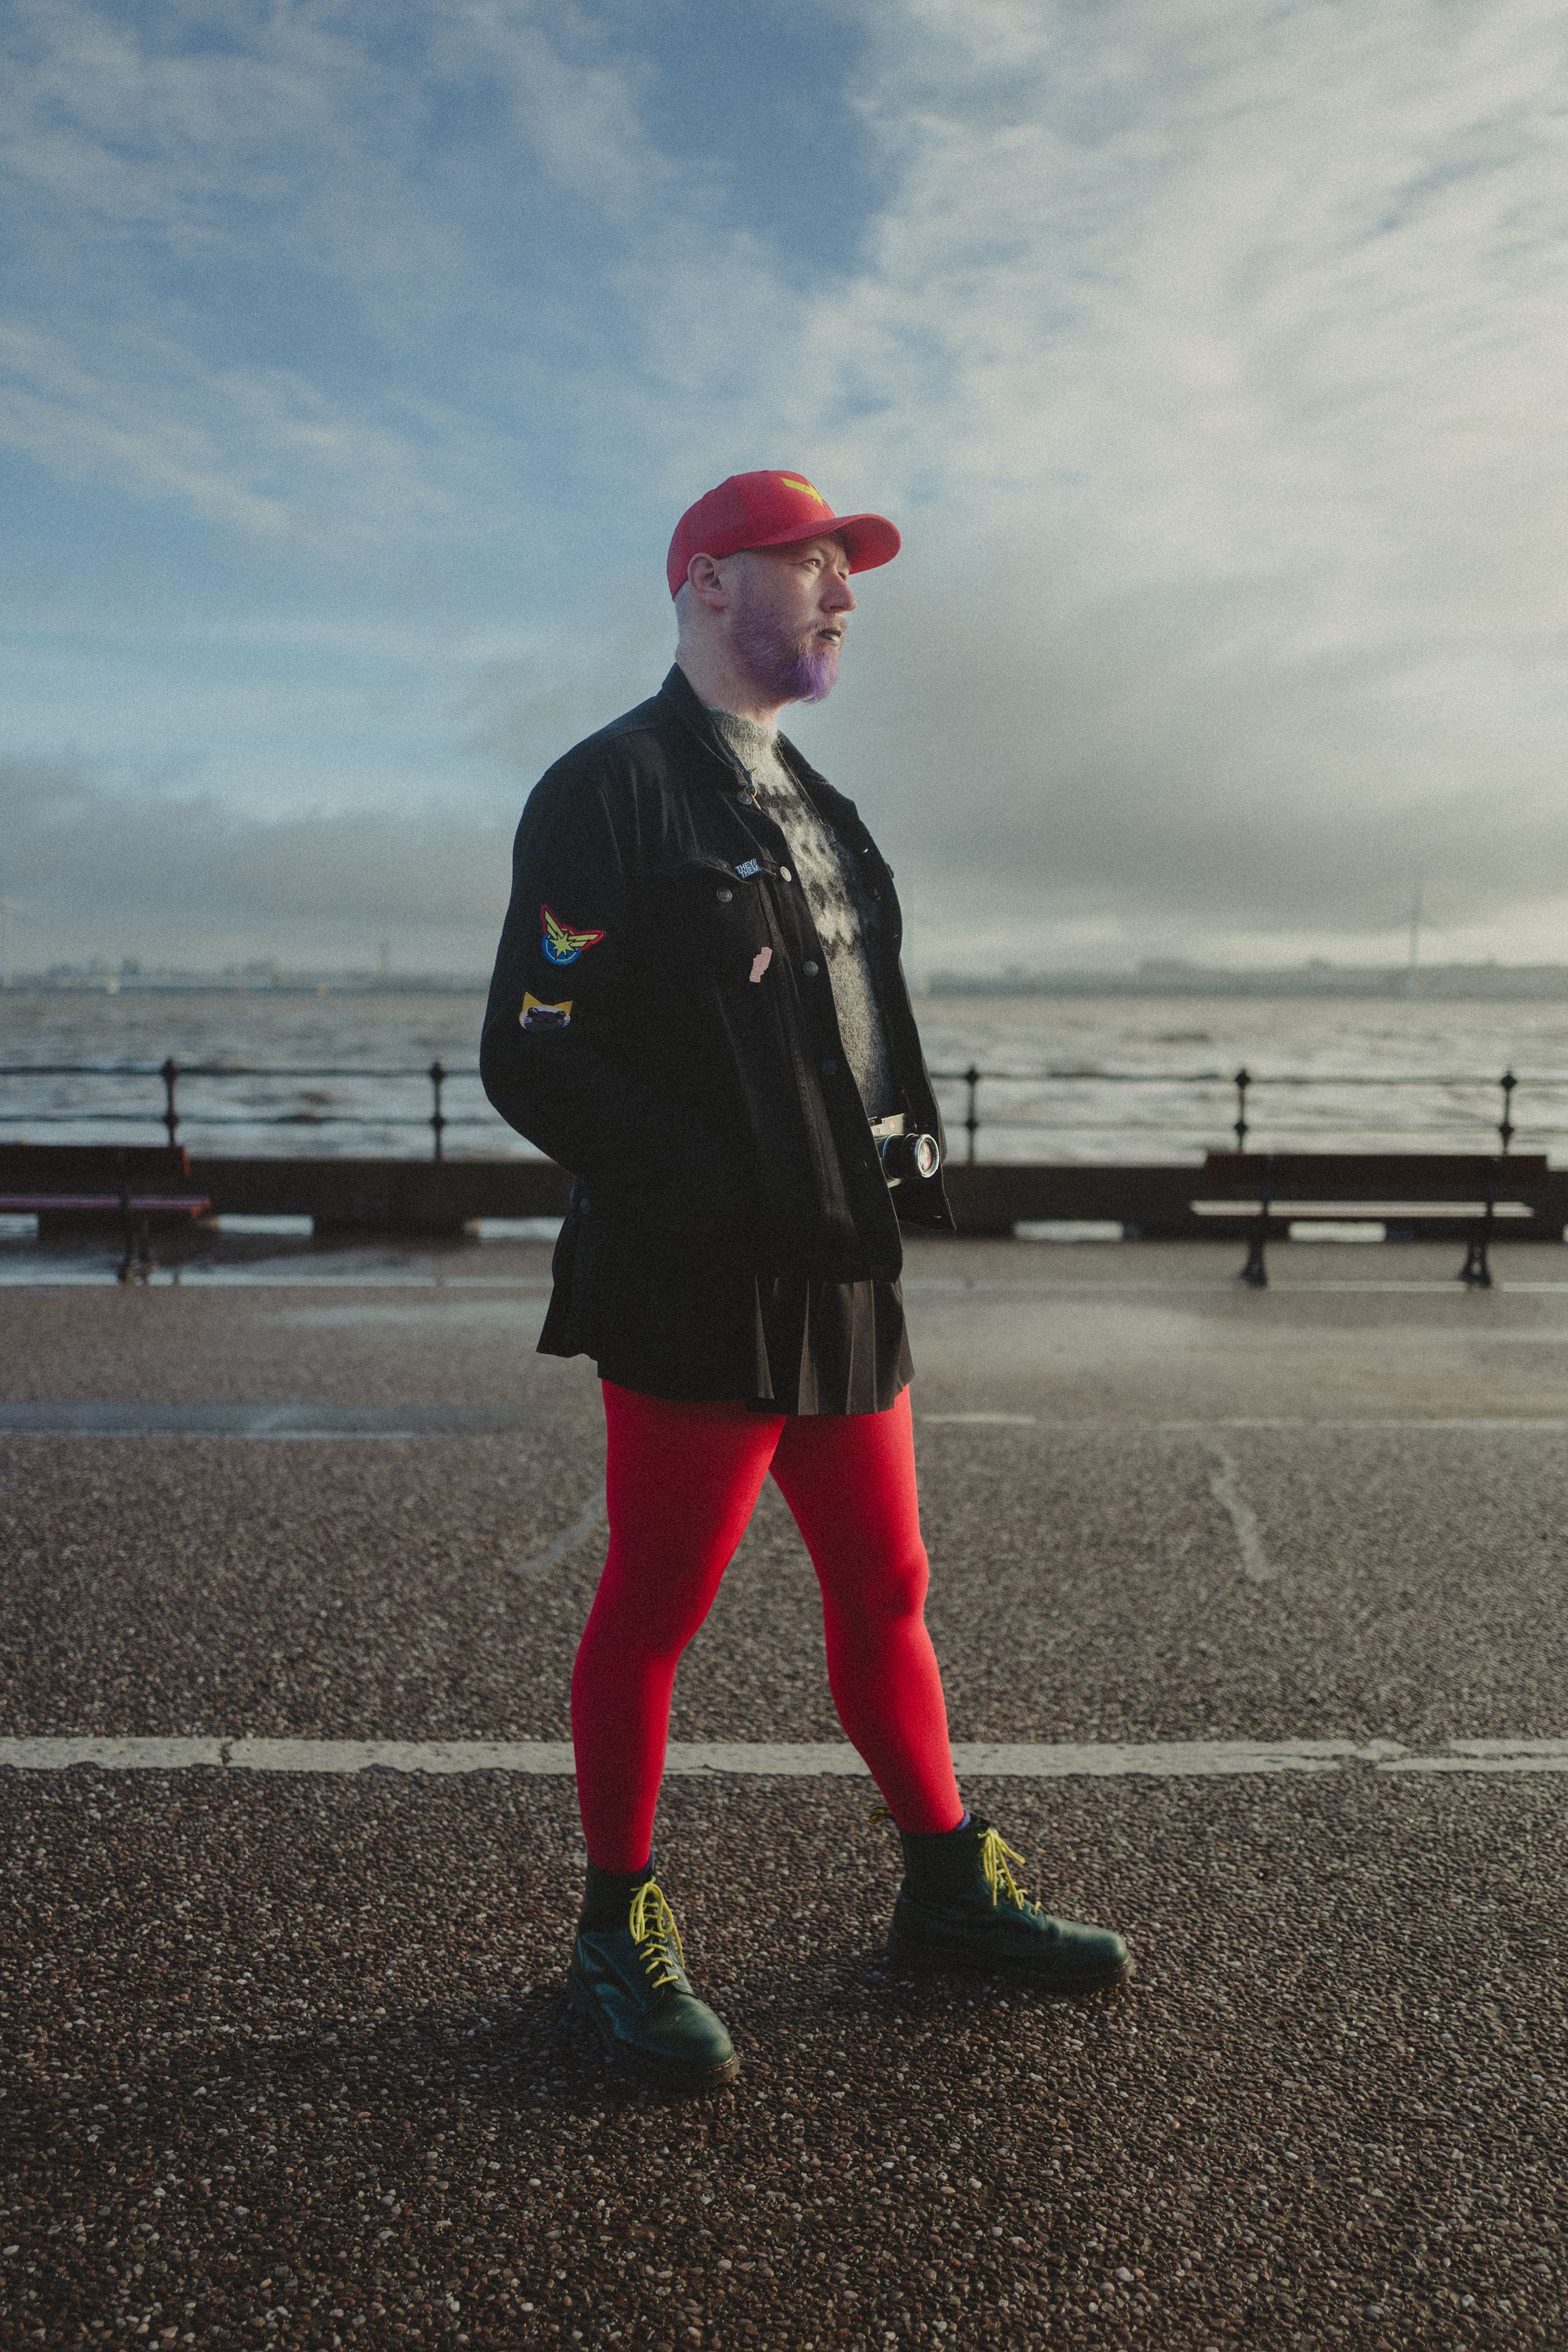 Non-binary person wearing black denim jacket, green boots, black skirt, red tights and a red cap standing on a promenade at high tide.